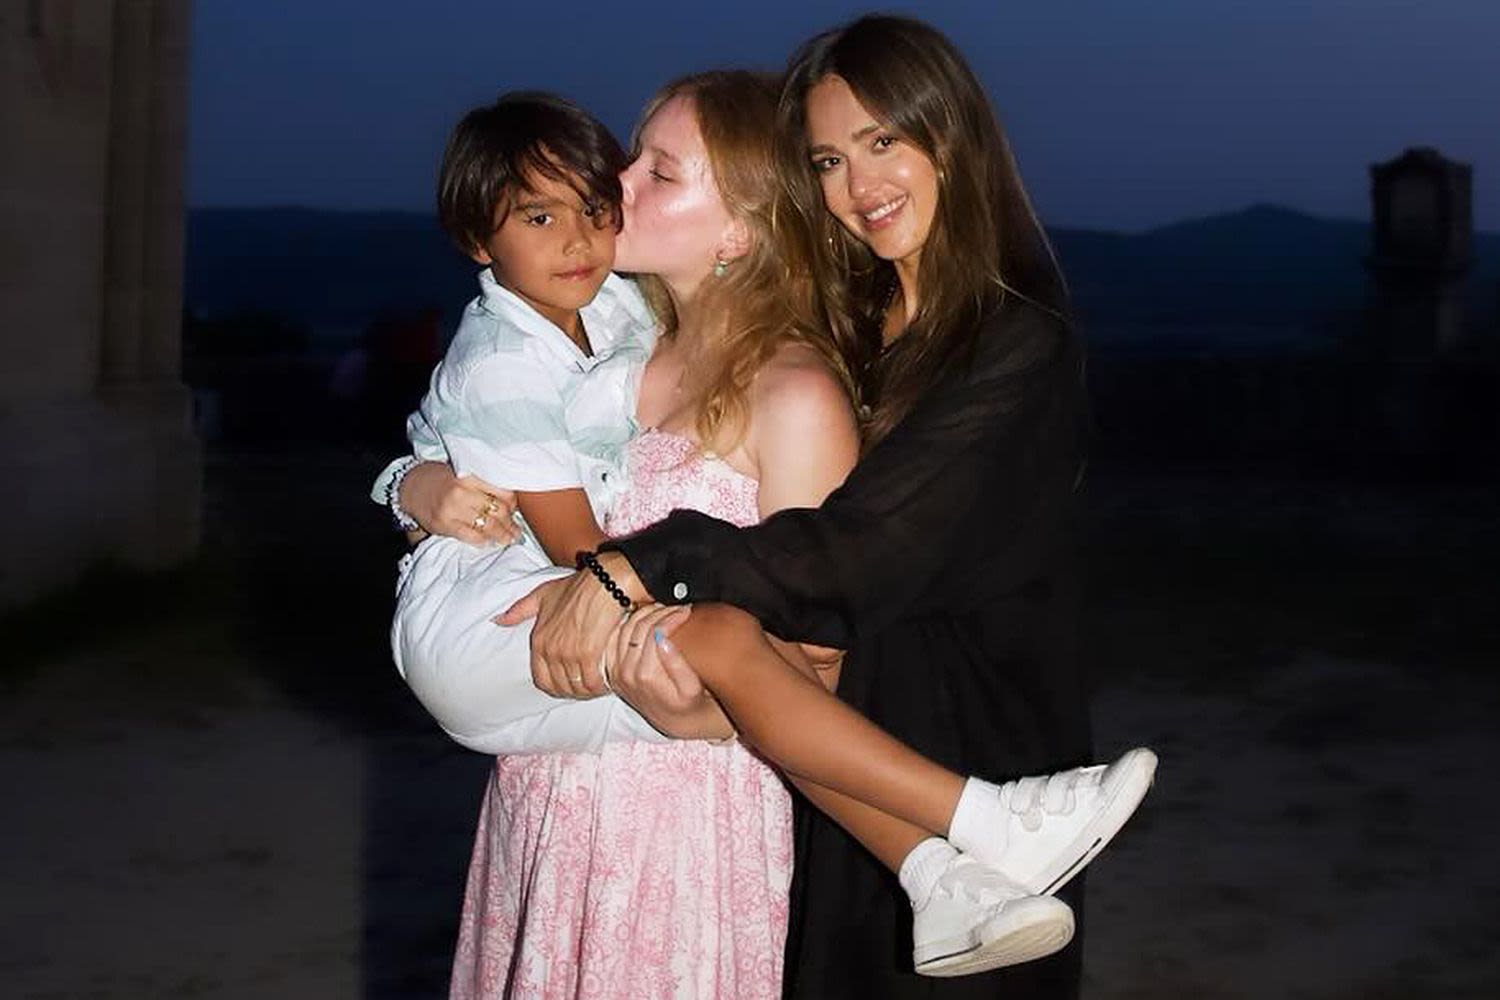 Jessica Alba Shares Adorable Family Photos While 'OOO Exploring' on Vacation: 'My Favorite Humans'